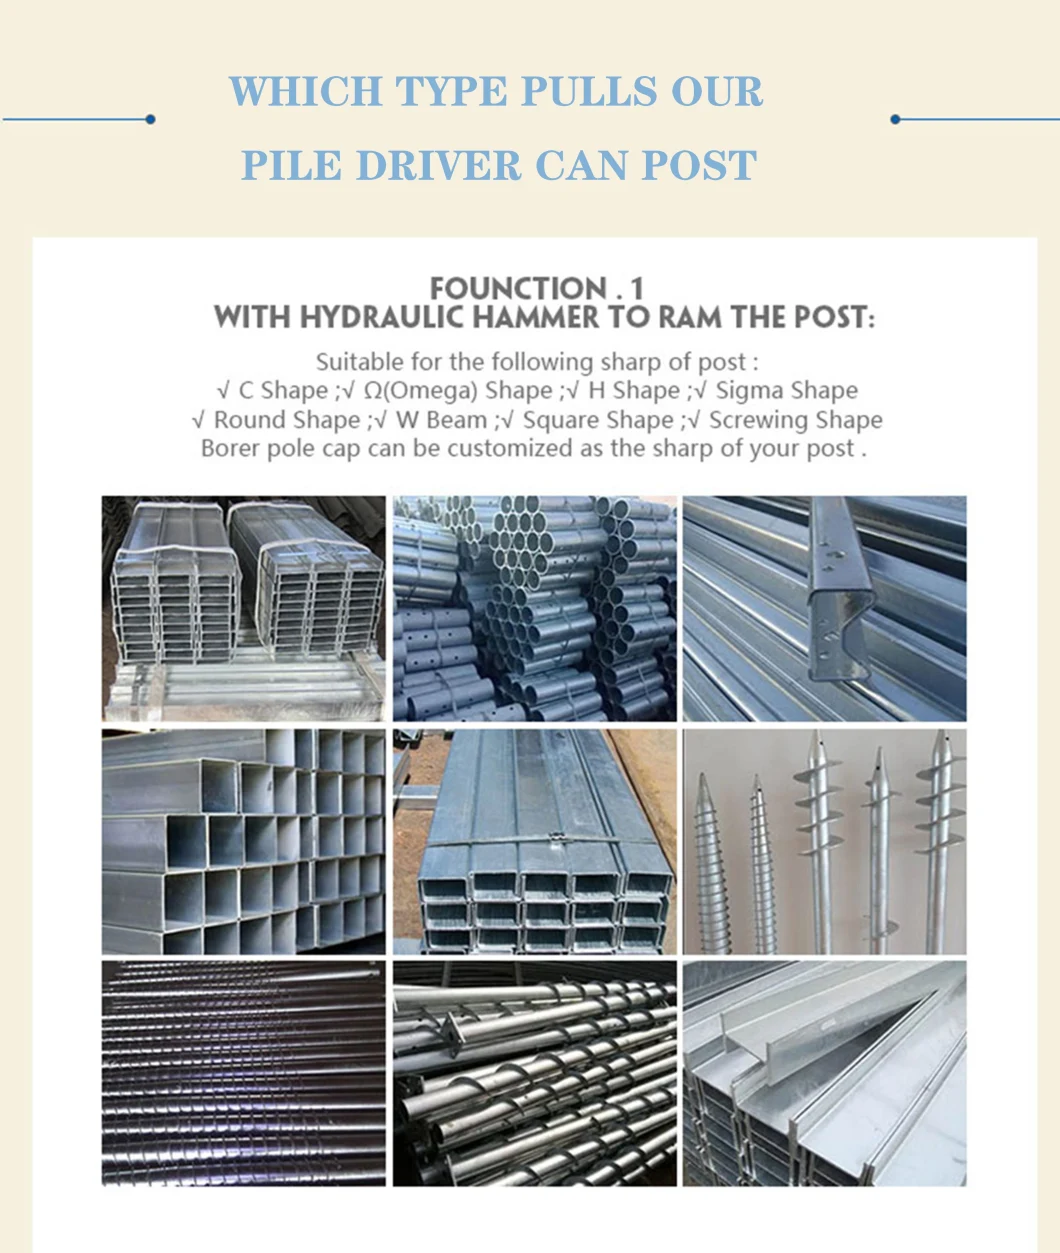 New Design Helical Pile Driver for Highway Guardrail Construction